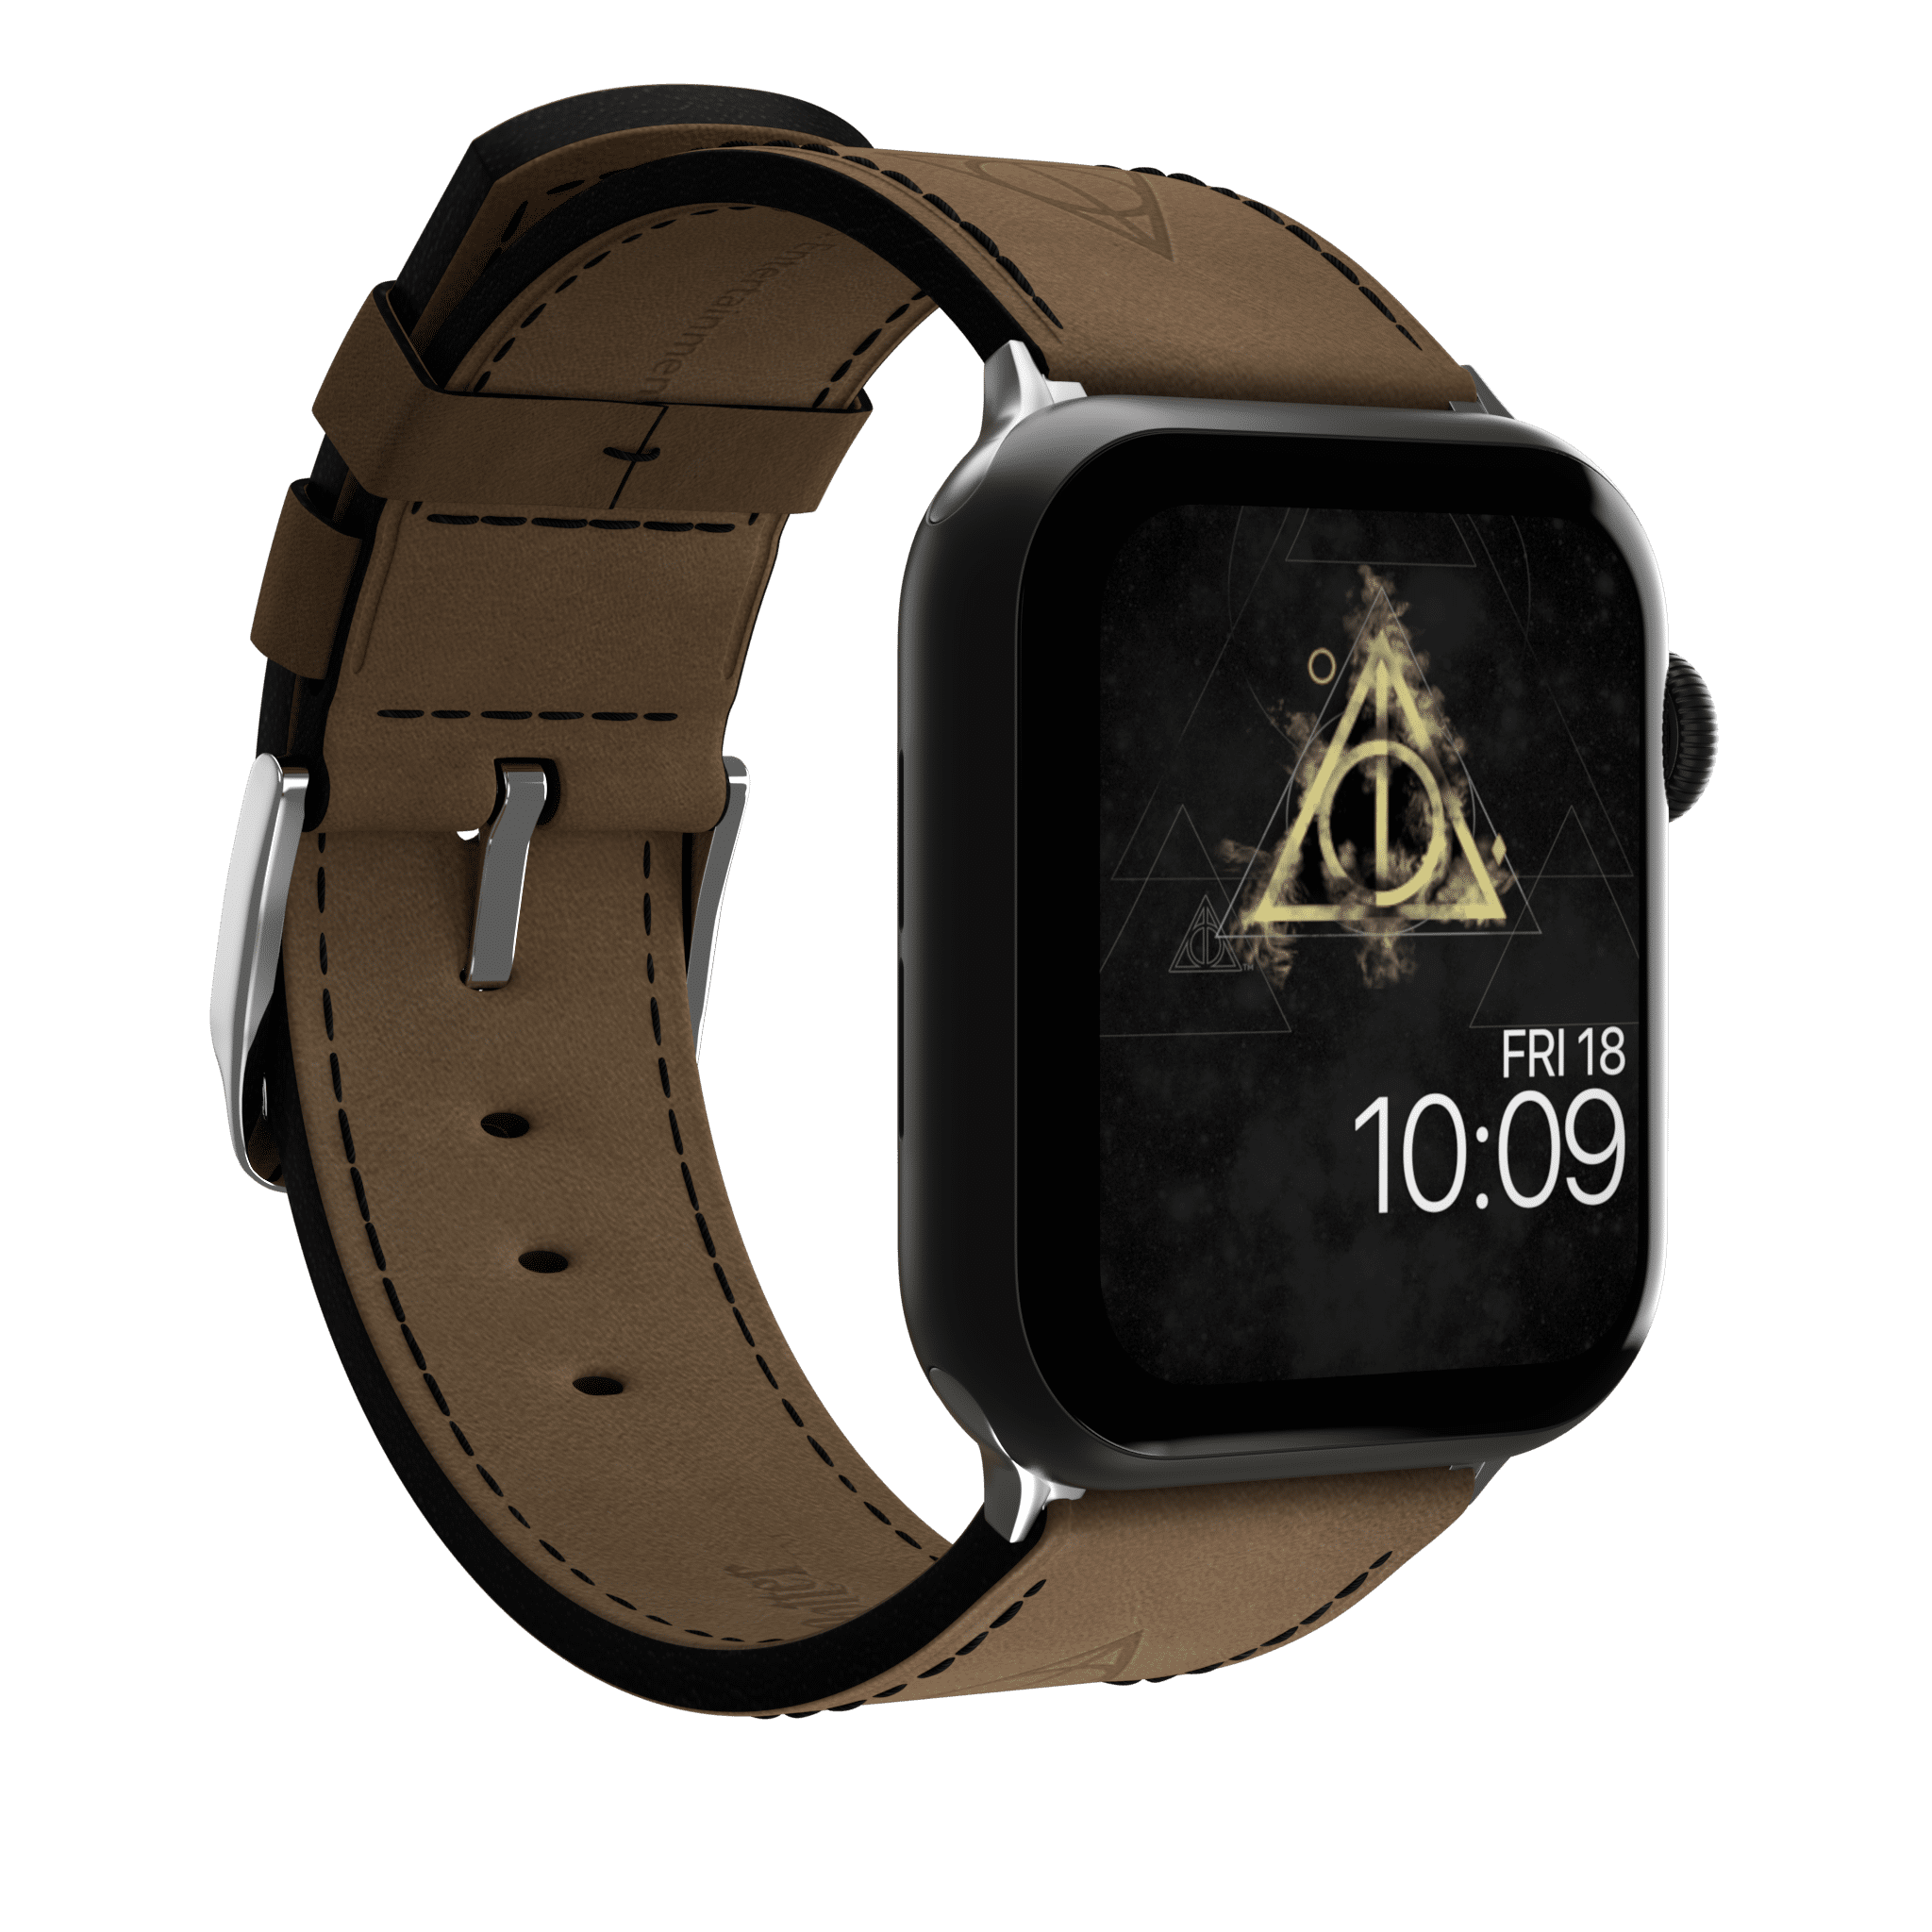 Harry Potter Hogwarts Edition - Silicone Apple Watch and Android